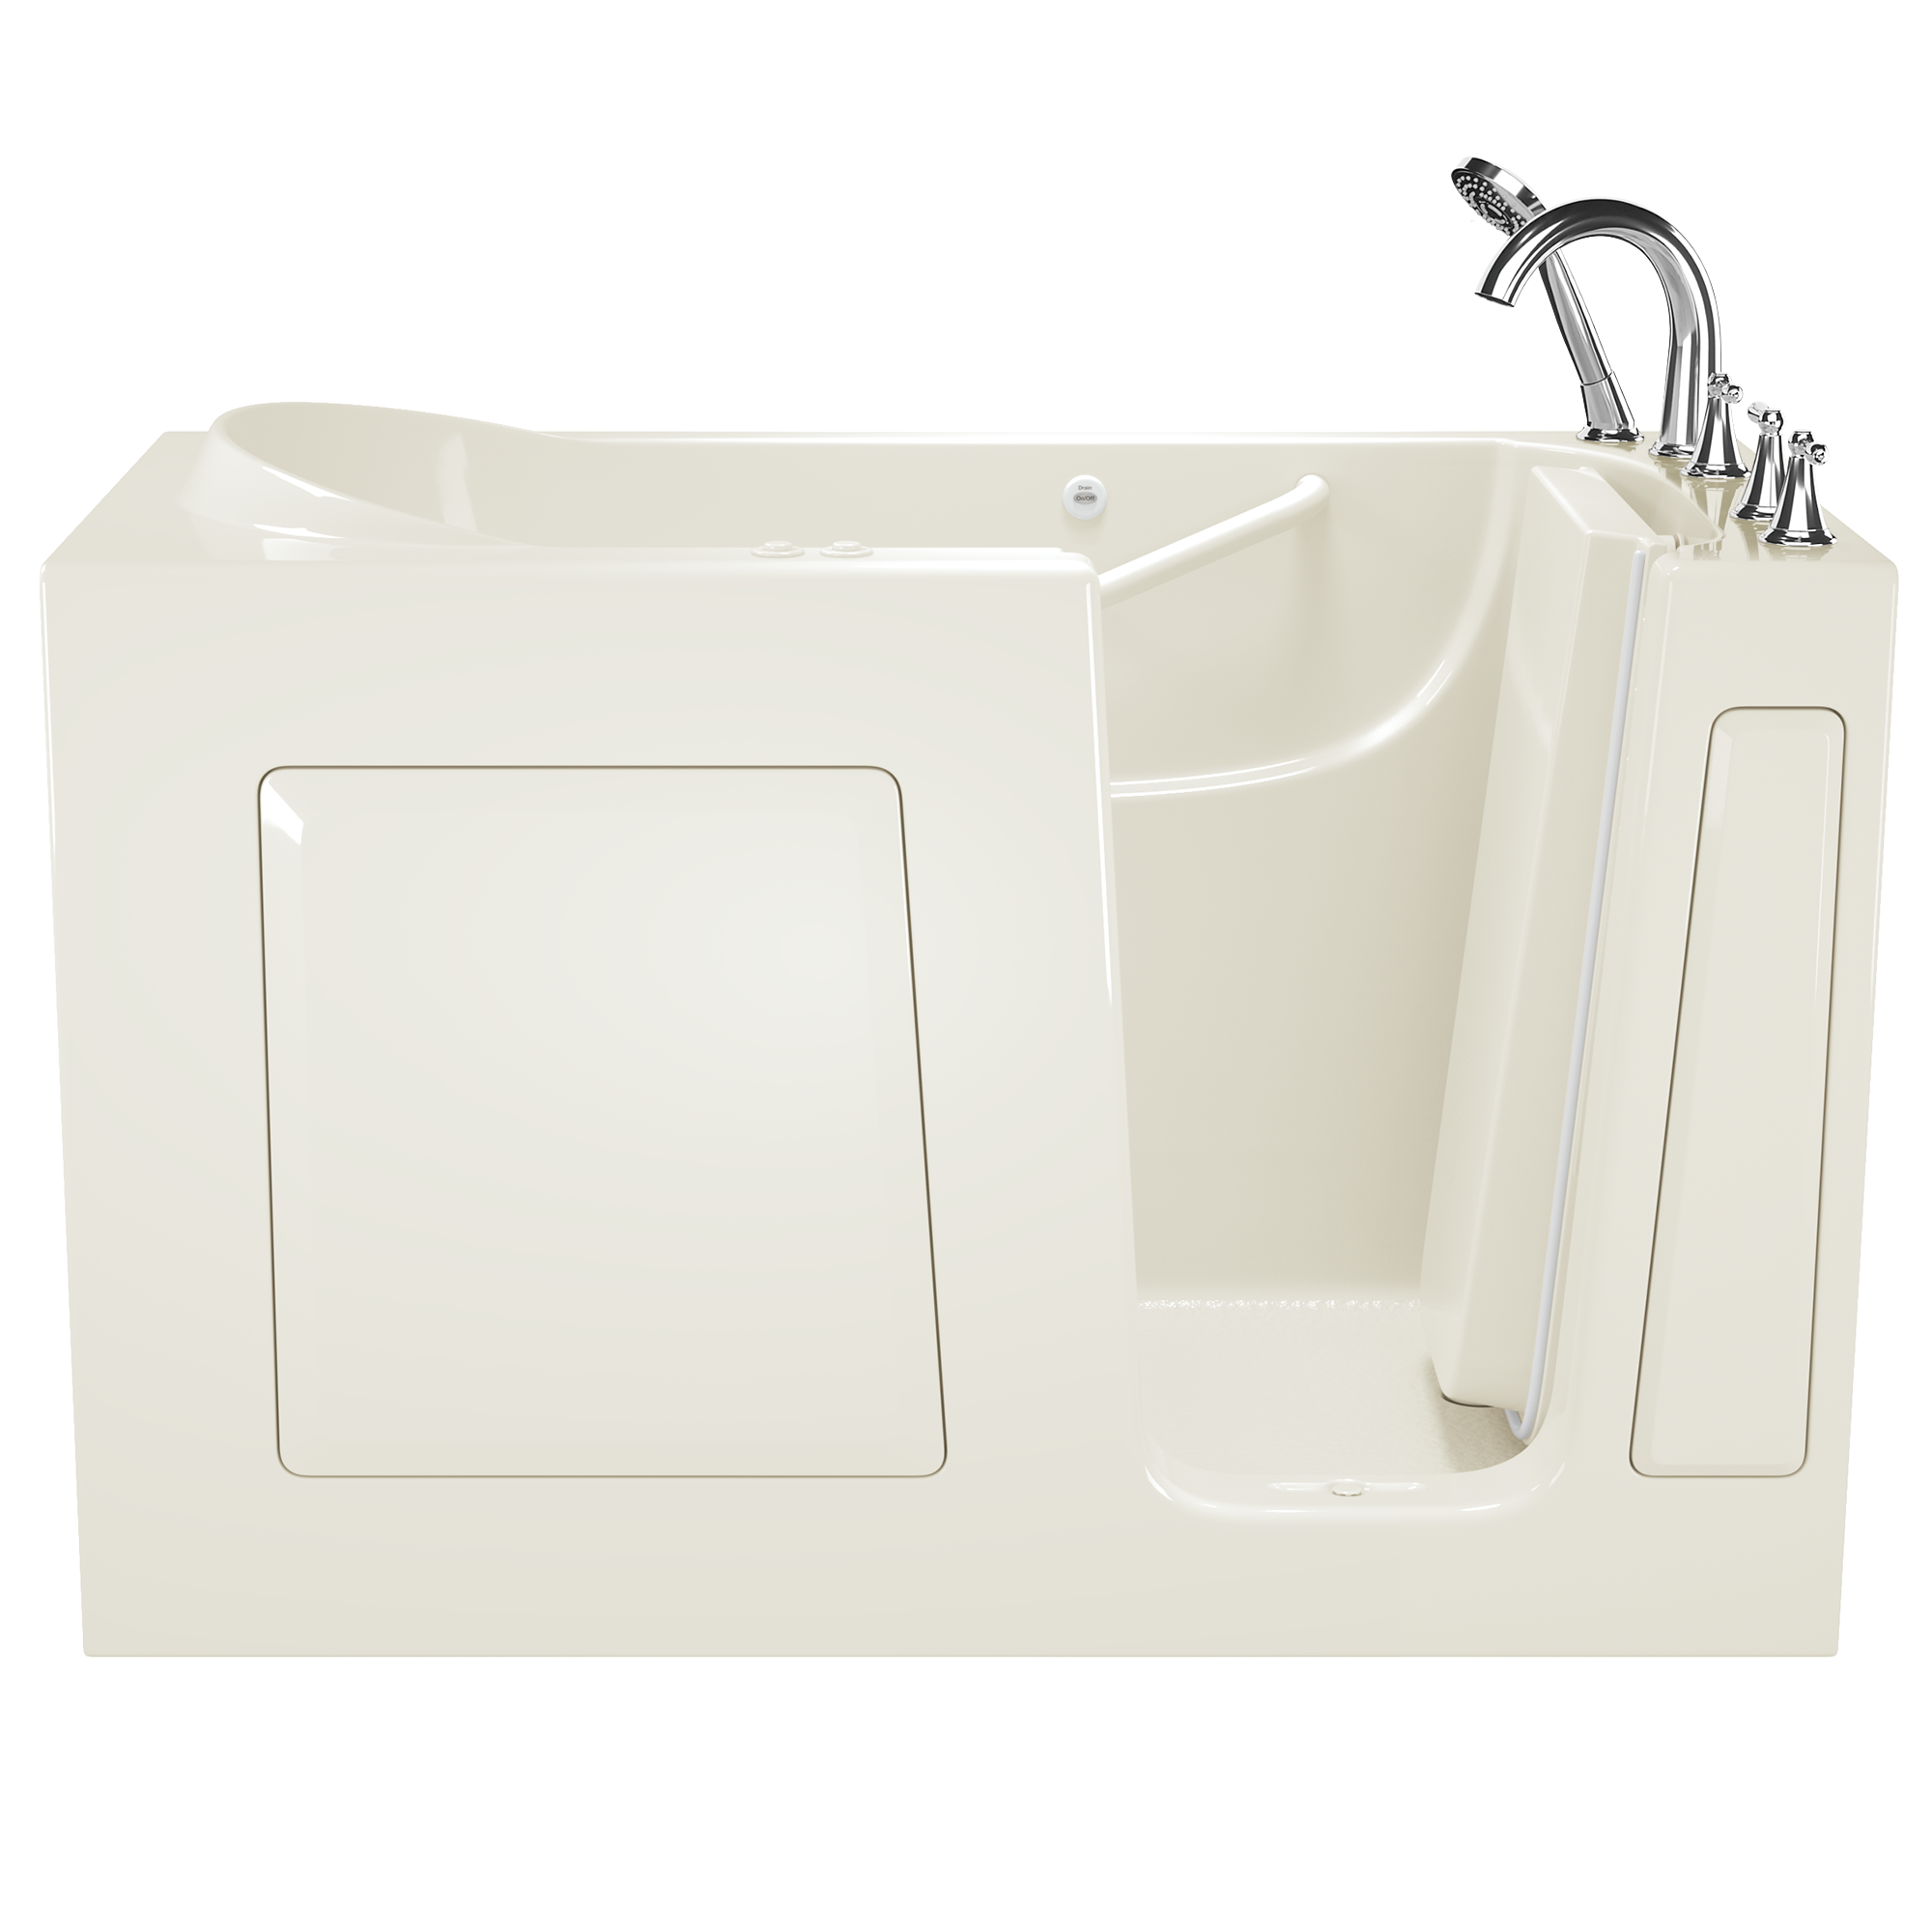 Gelcoat Value Series 30 x 60 -Inch Walk-in Tub With Combination Air Spa and Whirlpool Systems - Right-Hand Drain With Faucet